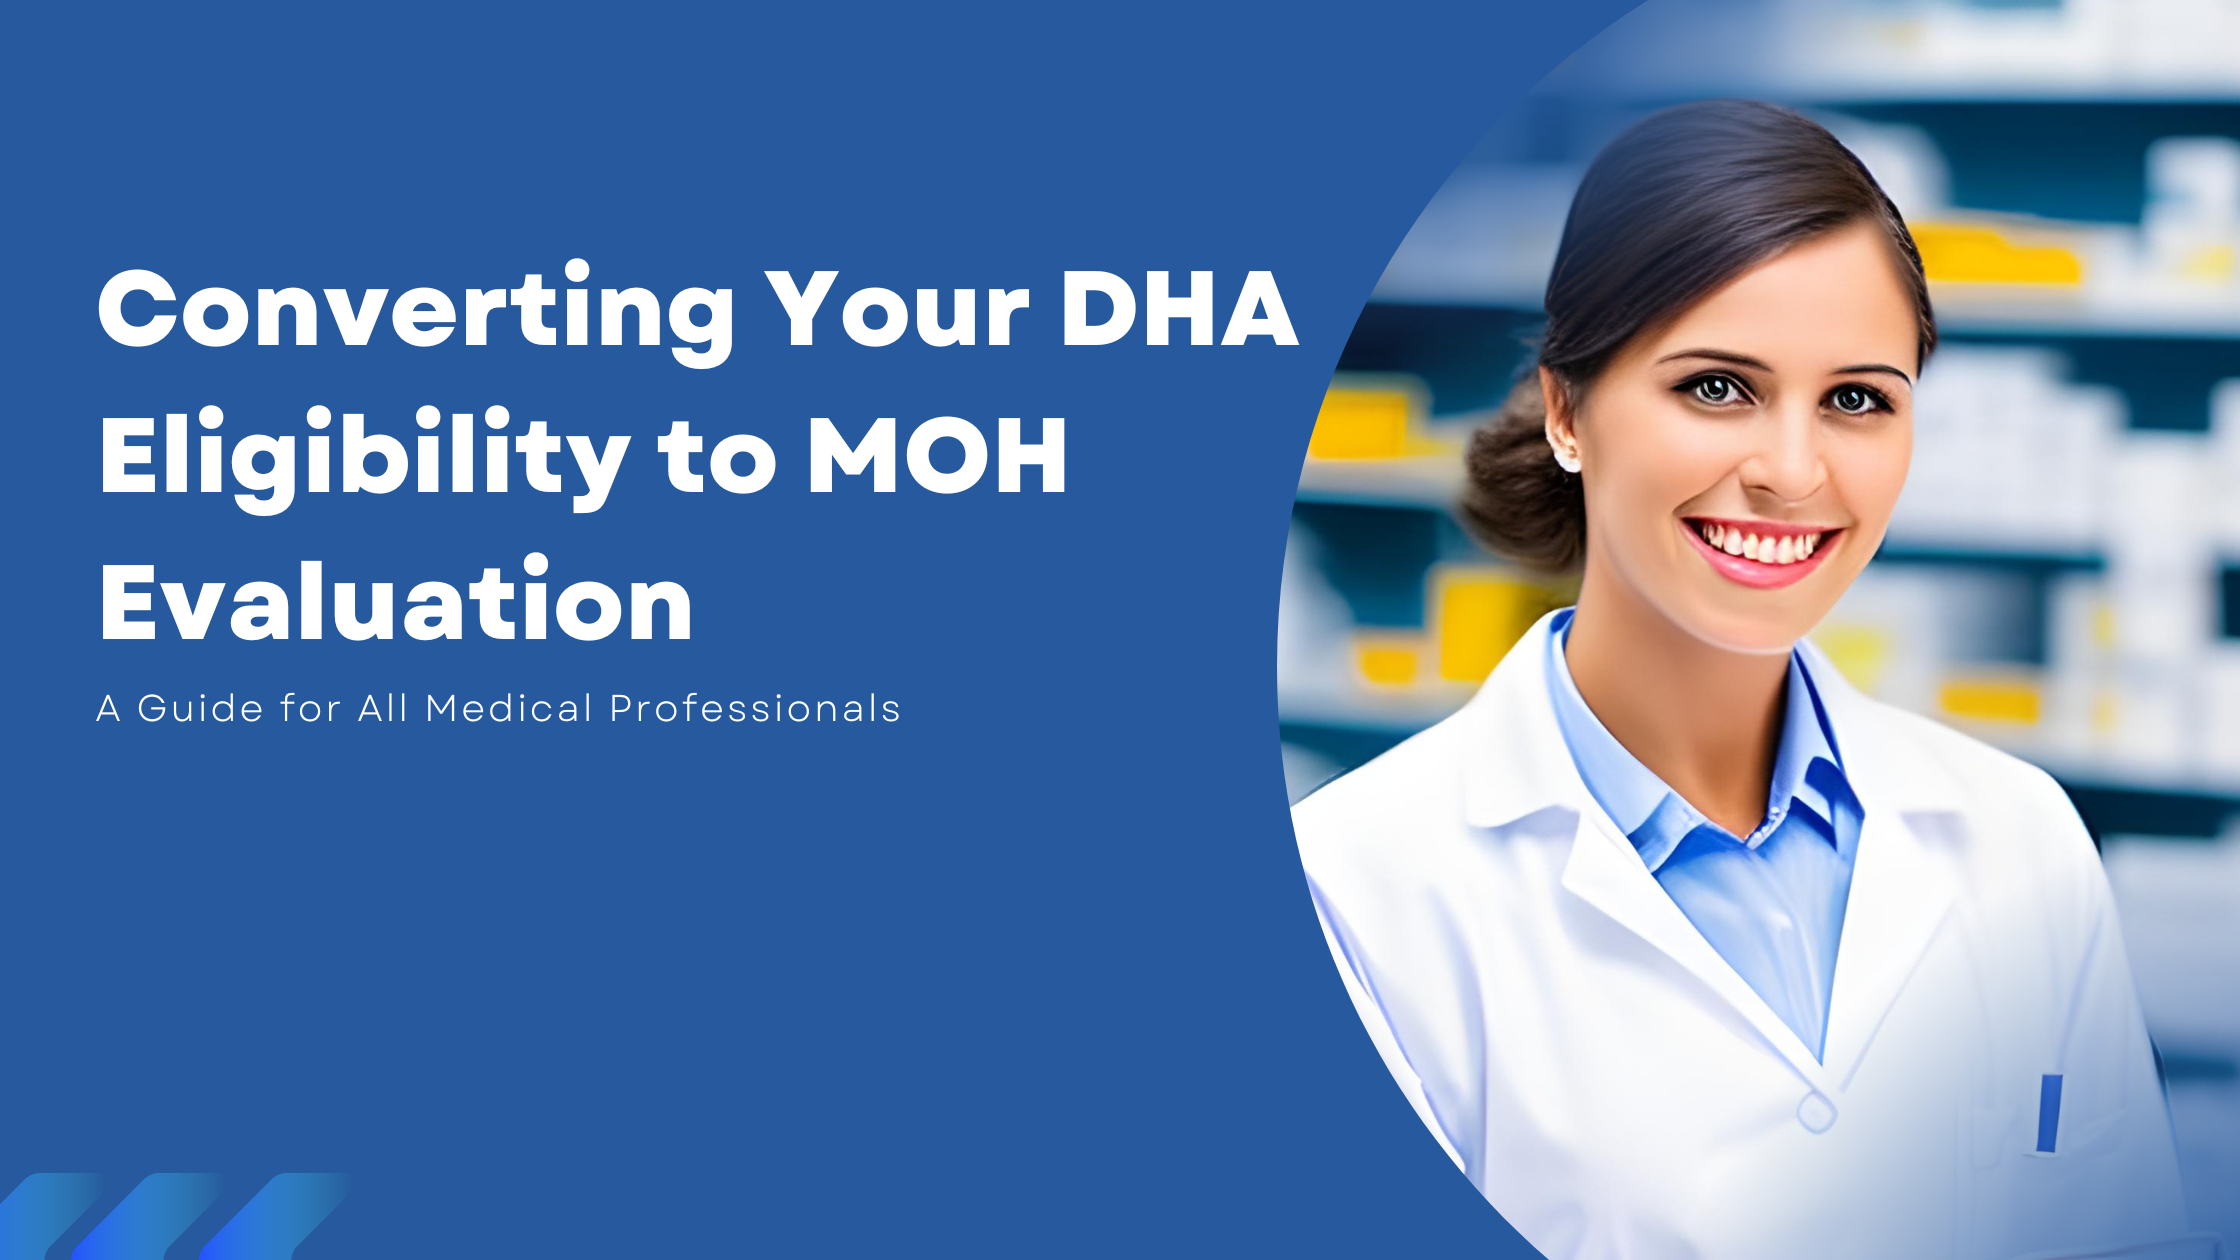 Converting Your DHA Eligibility to MOH Evaluation: A Guide for All Medical Professionals